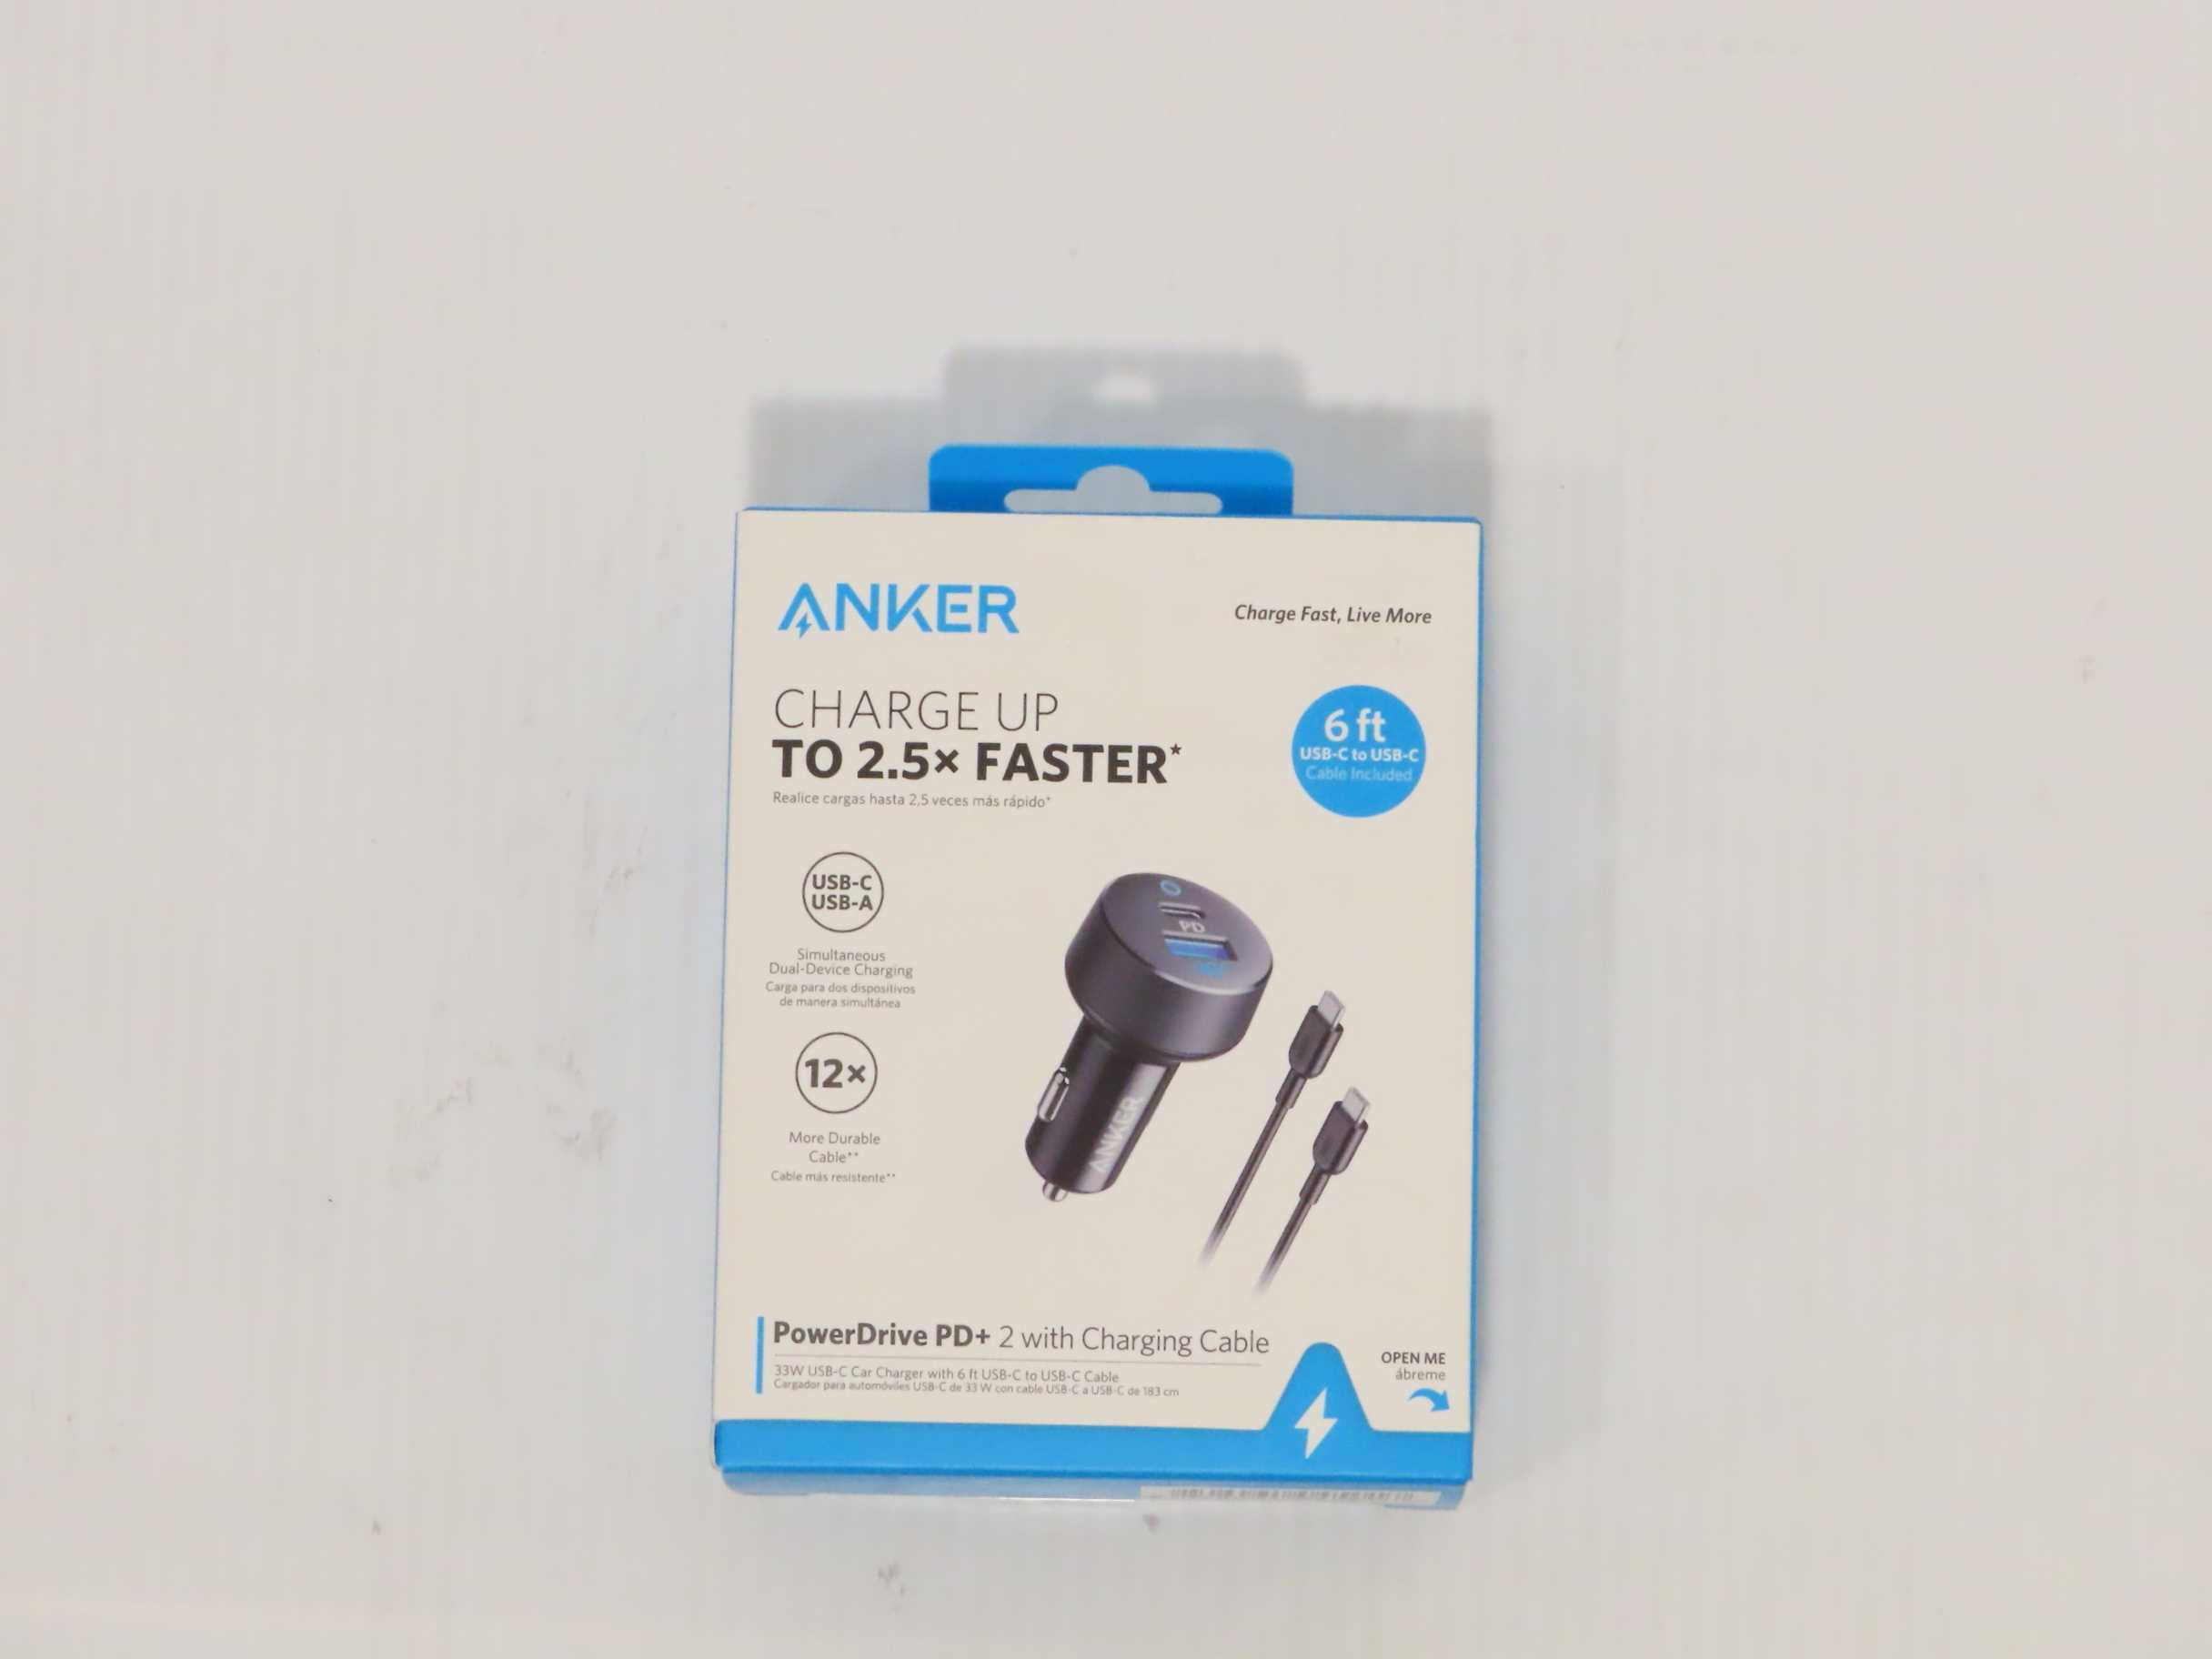 ANKER PowerDrive III Car Charger with 2-Ports USB Fast Charger 36W - Black